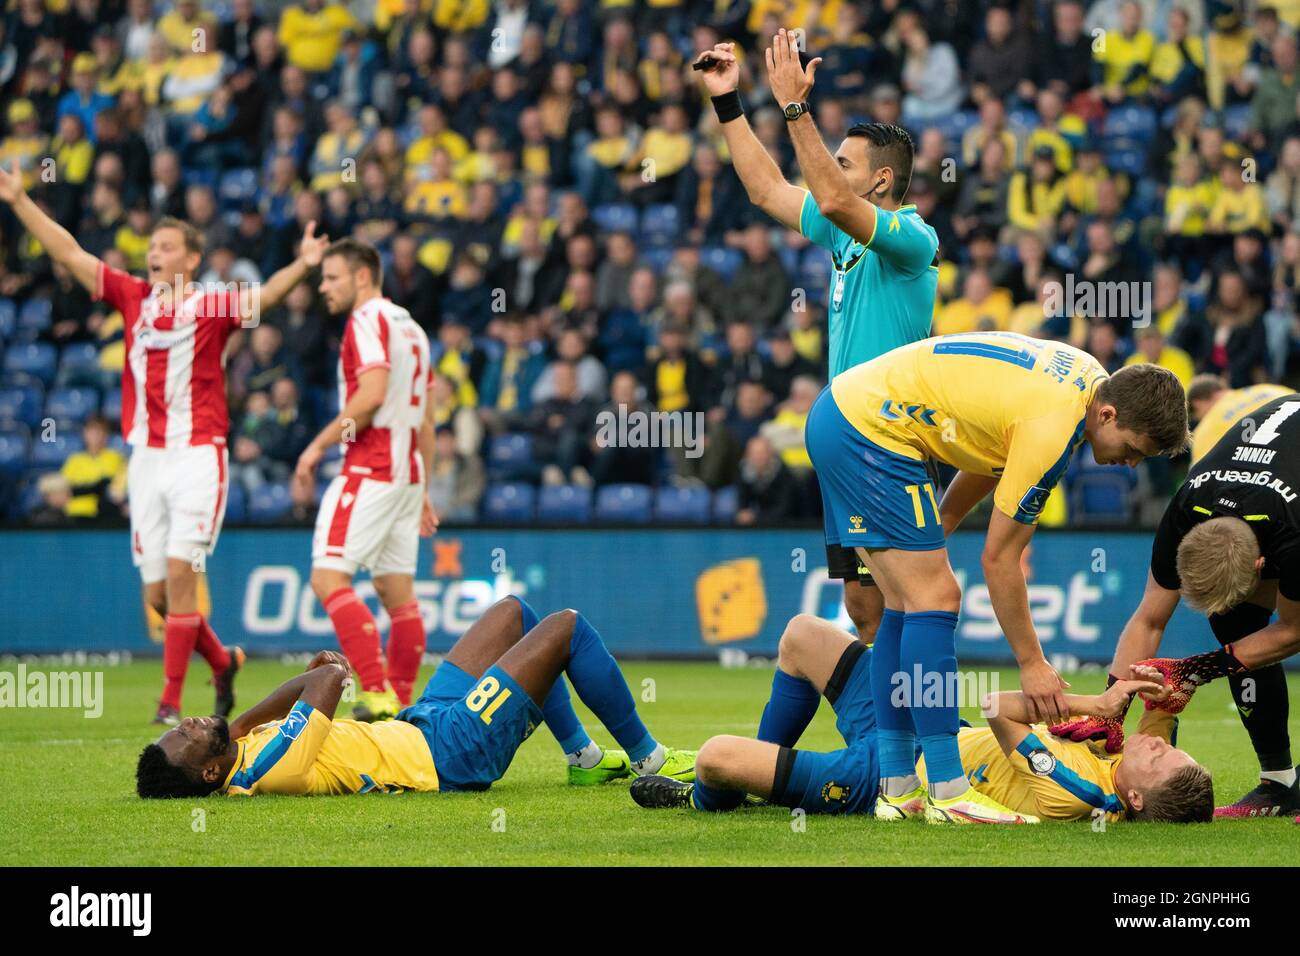 Brondby, Denmark. 26th Sep, 2021. Kevin Tshiembe (18) and Sigurd Rosted (4) of Broendby IF need treatment during the 3F Superliga match between Broendby IF and Aalborg Boldklub at Brondby Stadion. (Photo Credit: Gonzales Photo/Alamy Live News Stock Photo